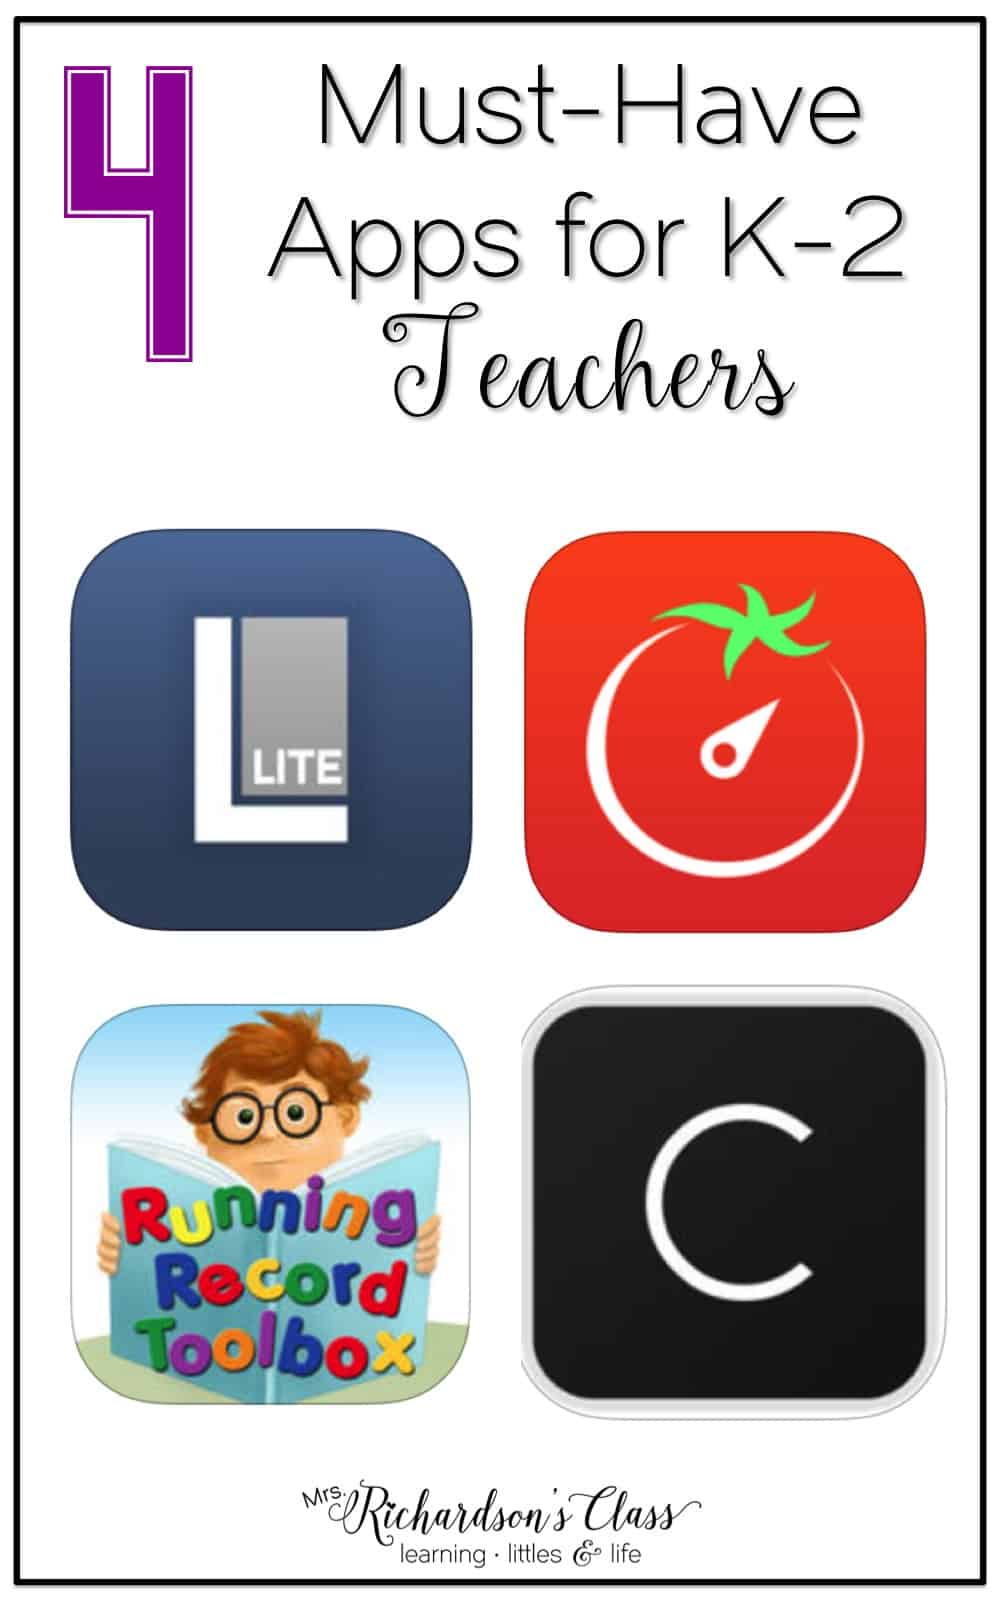 There are tons of great apps for students to use, but what about apps for teachers to use as they are teaching? This short group of 4 apps are definitely must-haves for any elementary teacher!